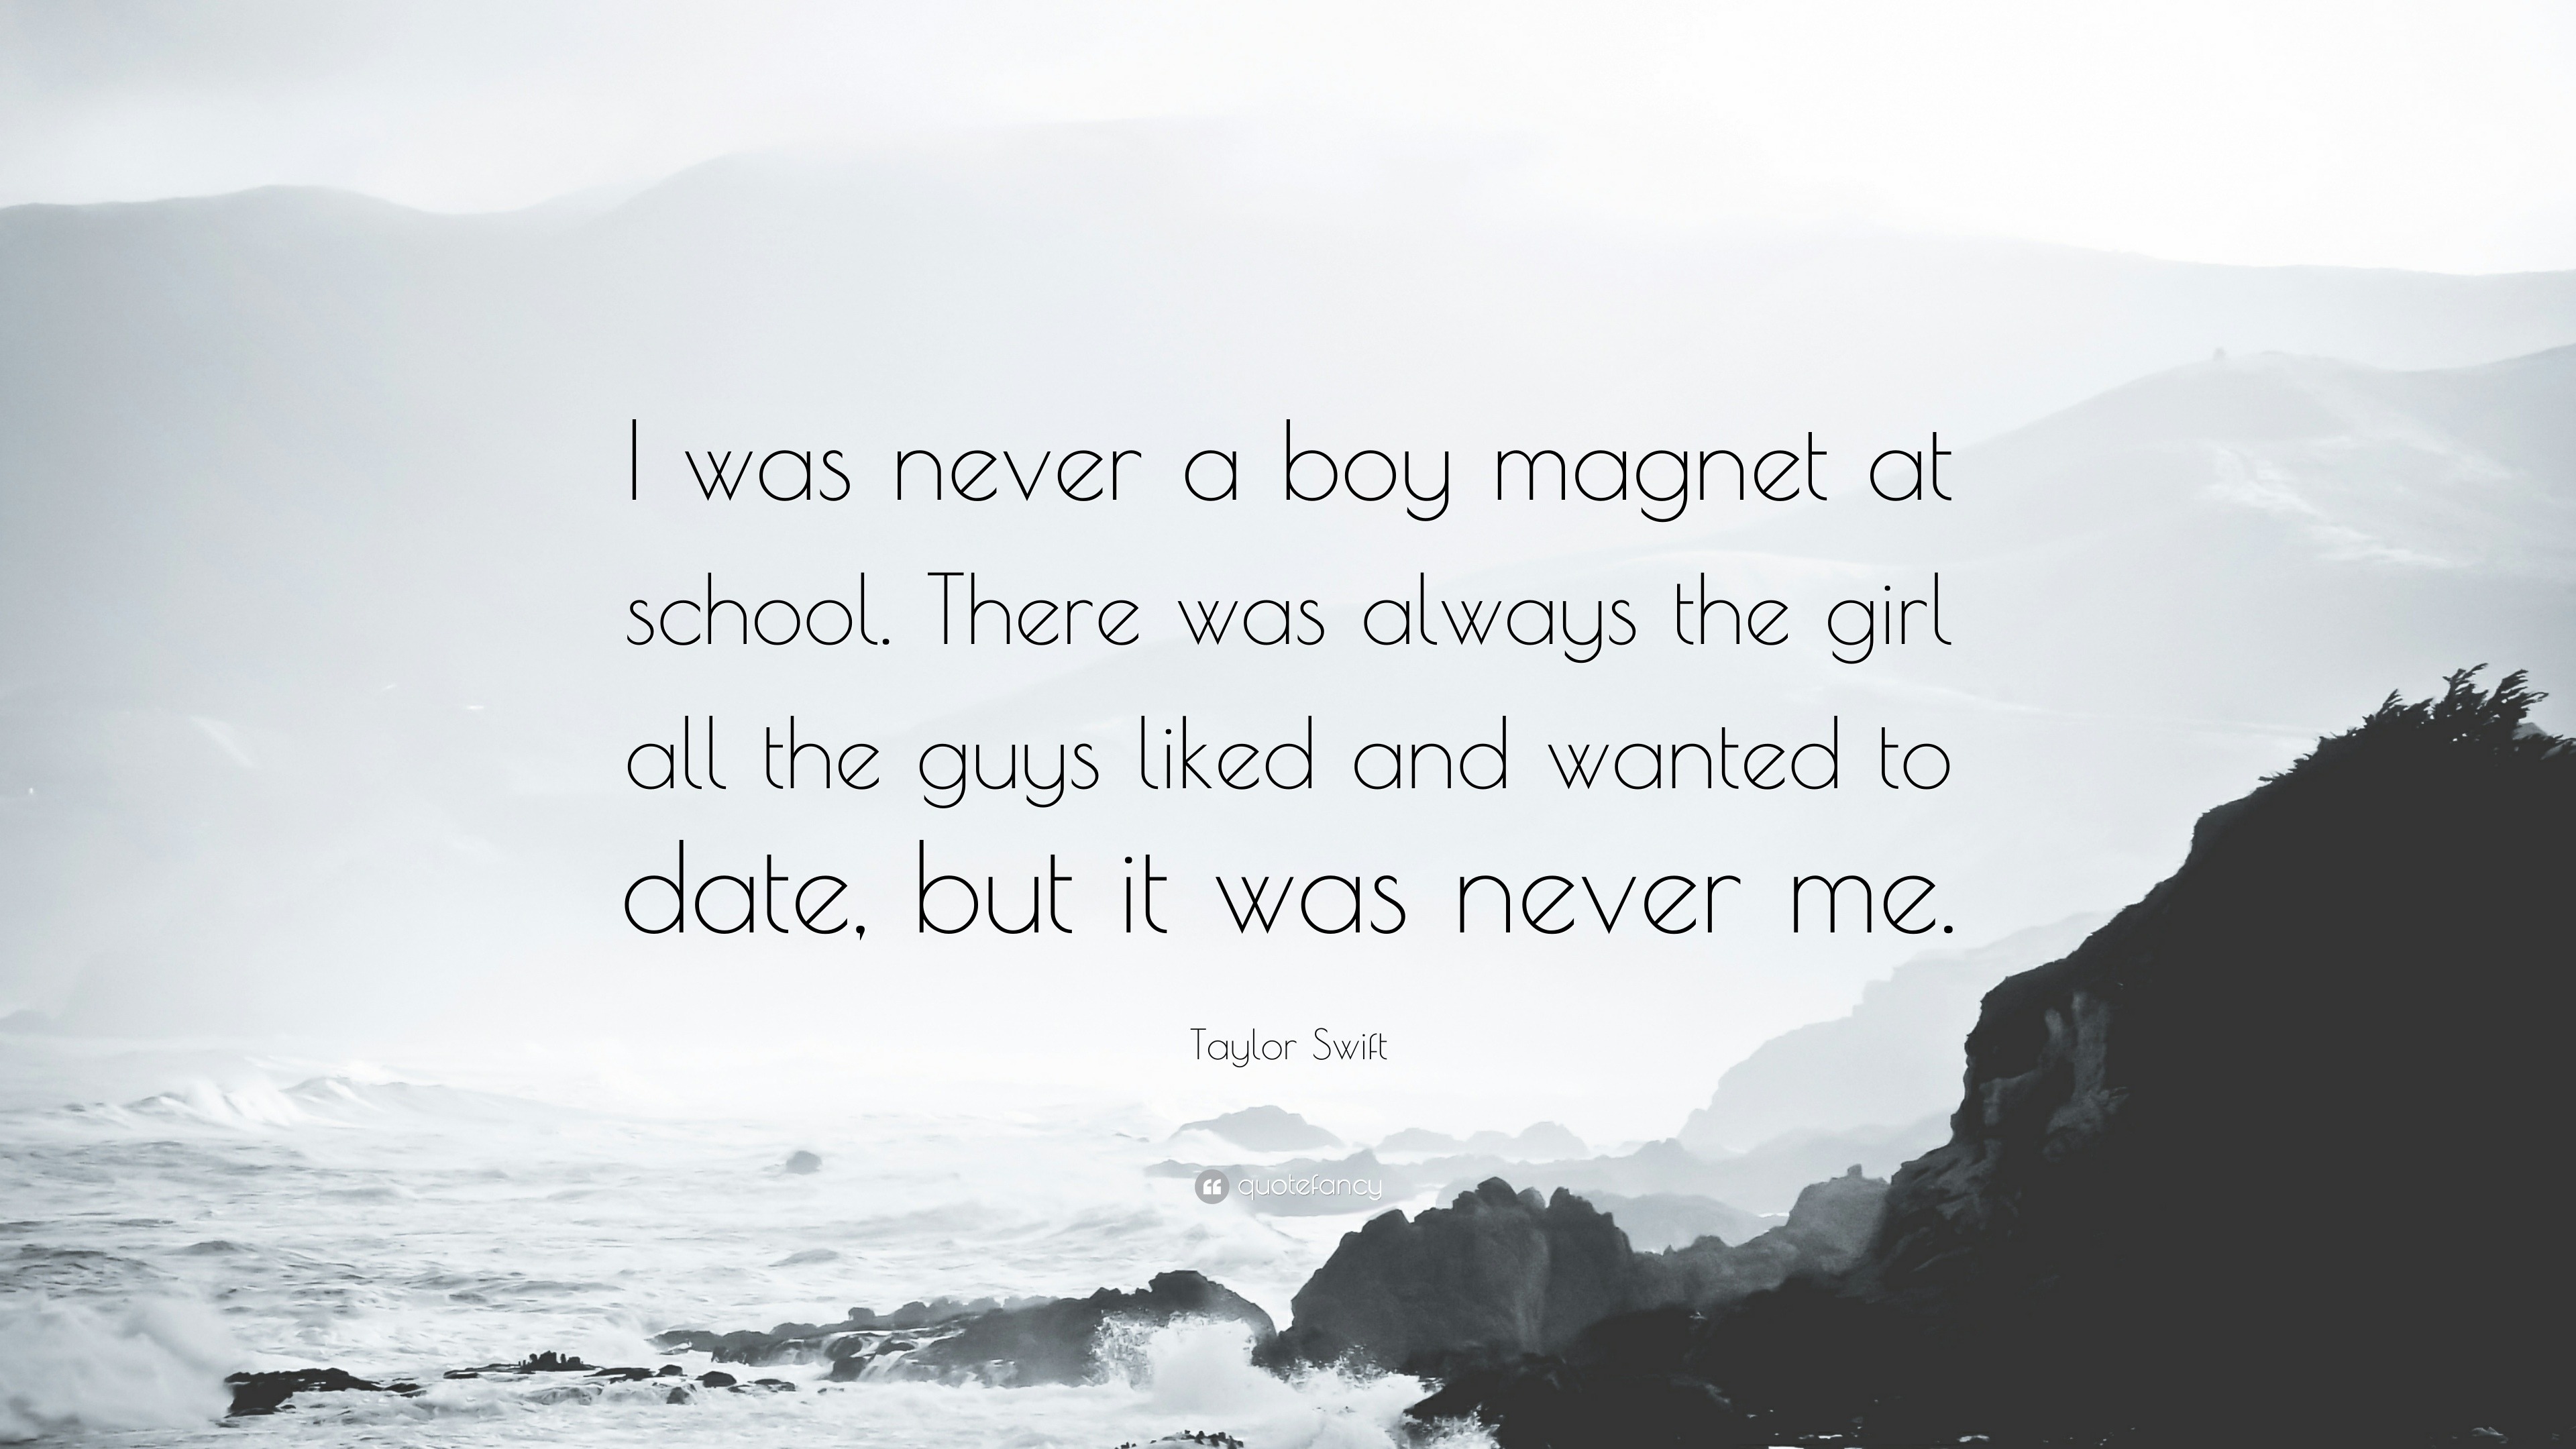 https://quotefancy.com/media/wallpaper/3840x2160/539586-Taylor-Swift-Quote-I-was-never-a-boy-magnet-at-school-There-was.jpg